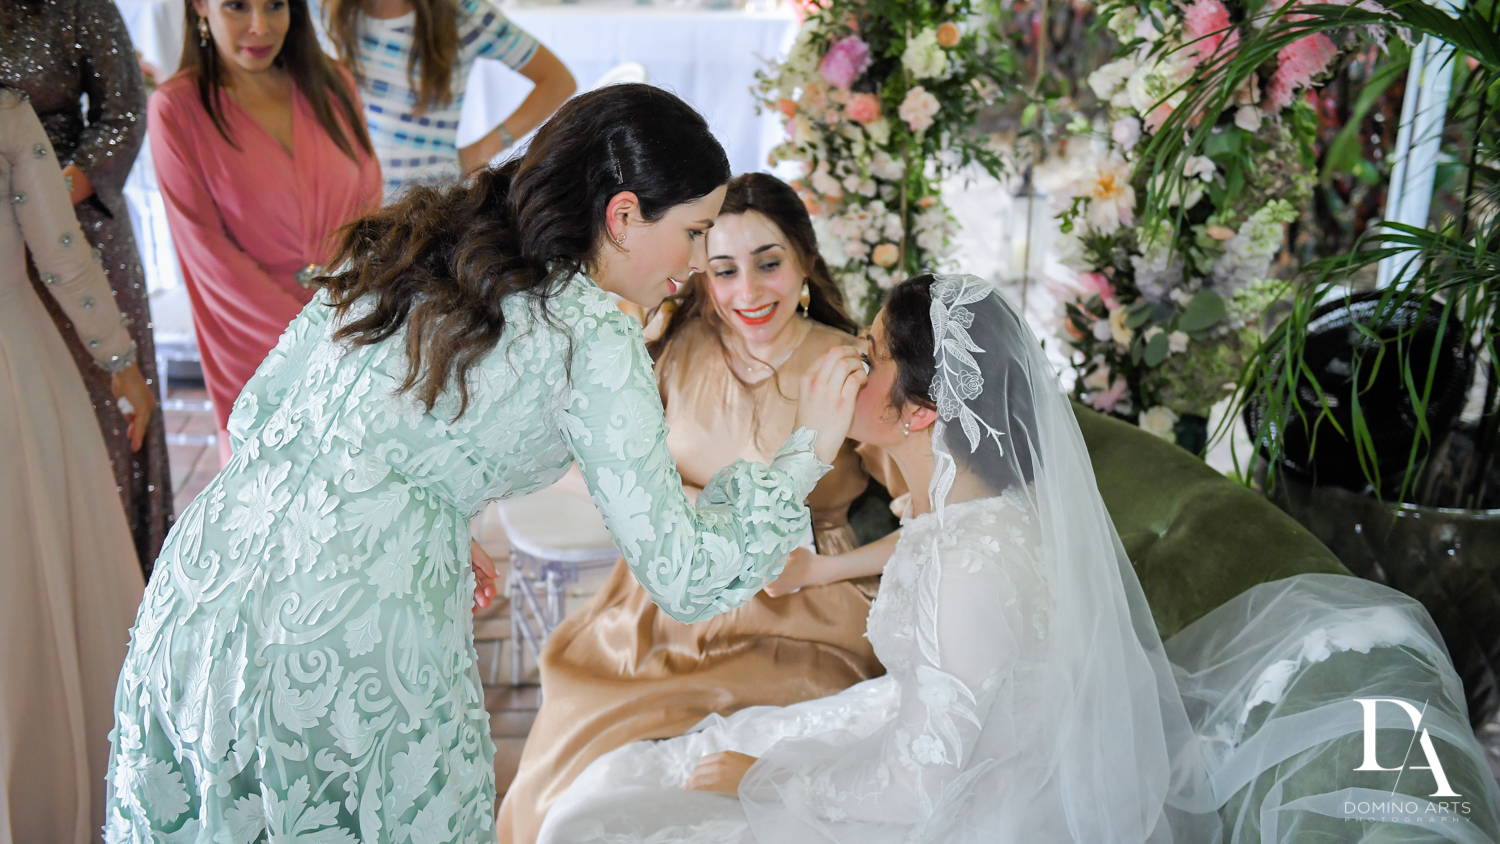 bedeken for Jewish Orthodox Wedding in Palm Beach by Domino Arts Photography